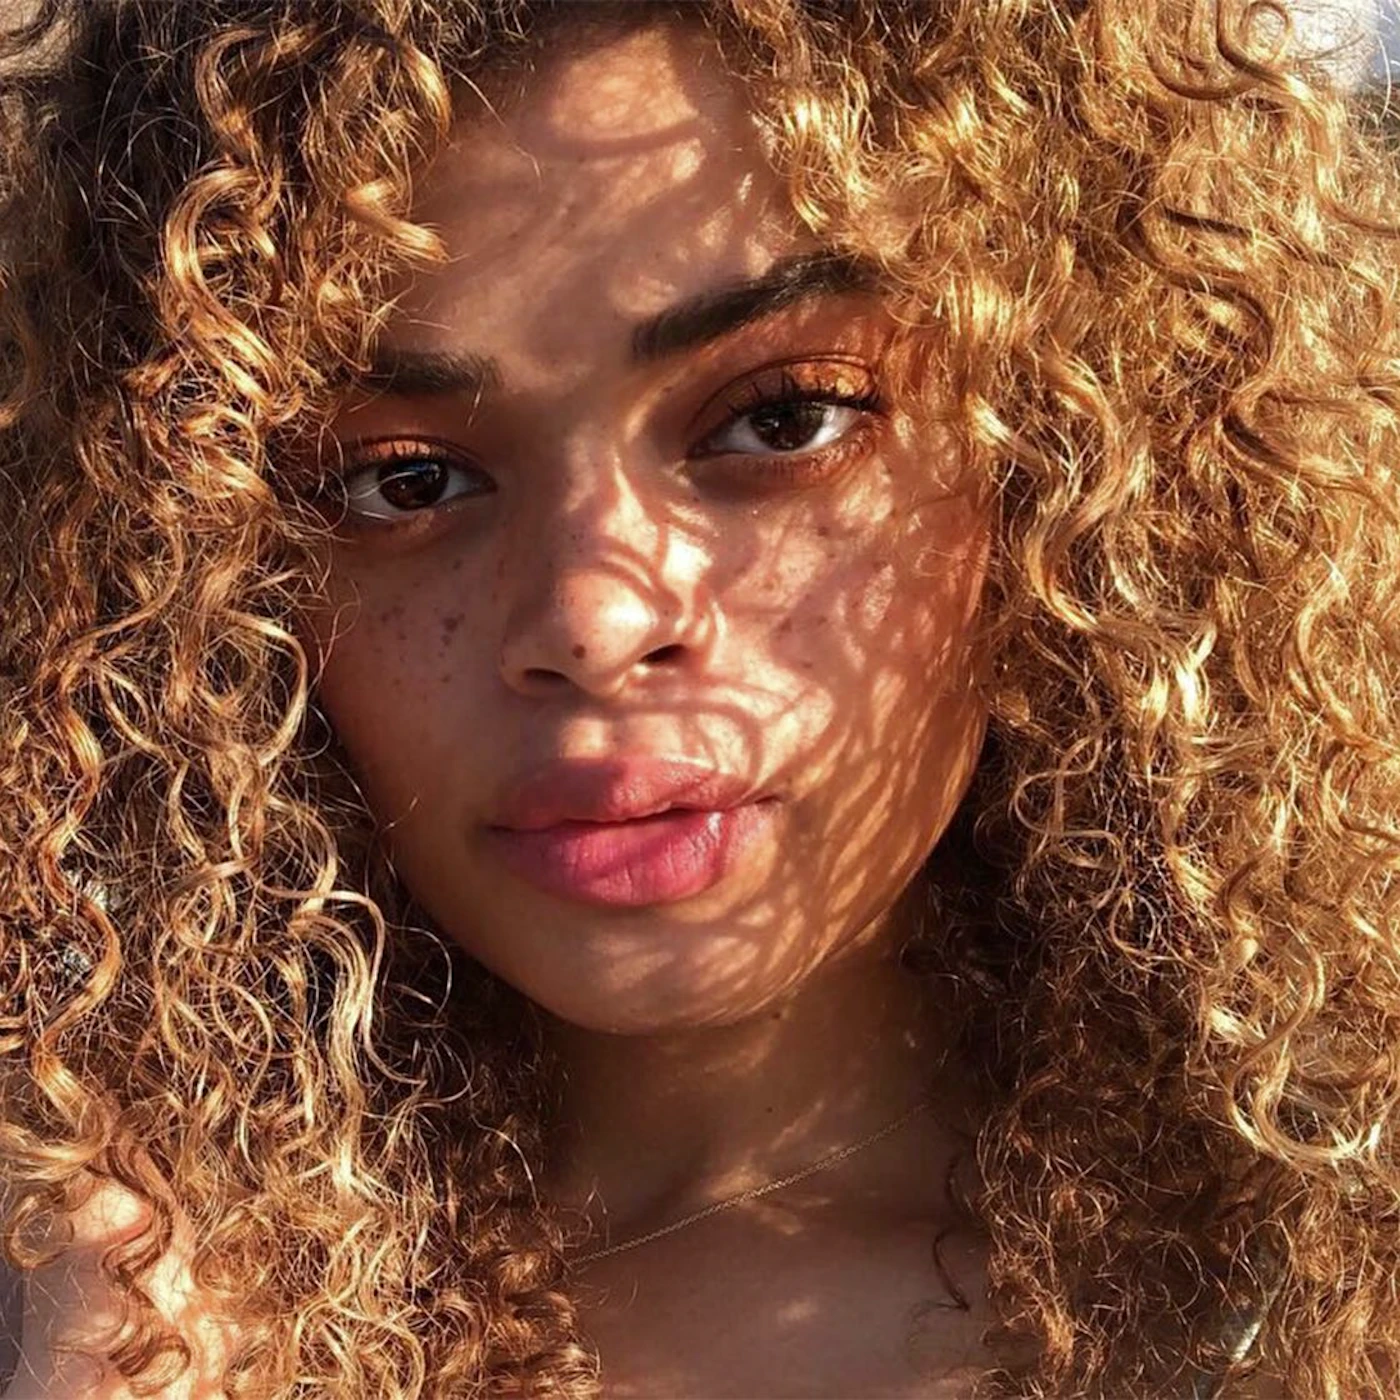 Our junior beauty writer’s curly hair routine - in micro detail